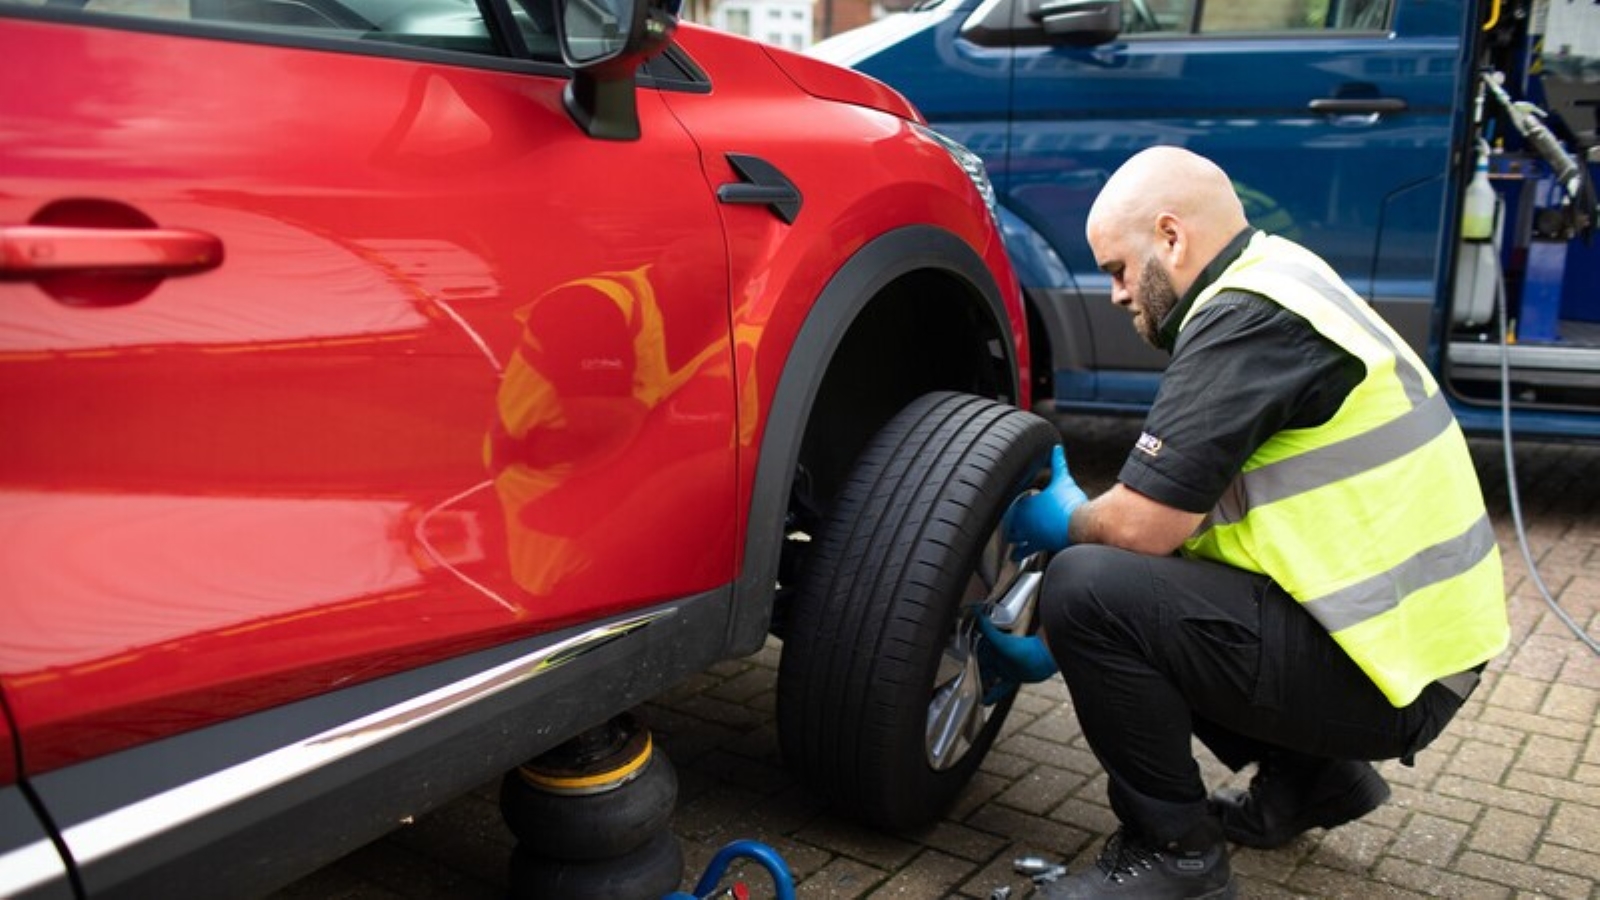 A Kwik Fit engineer installing new tyres on a red car